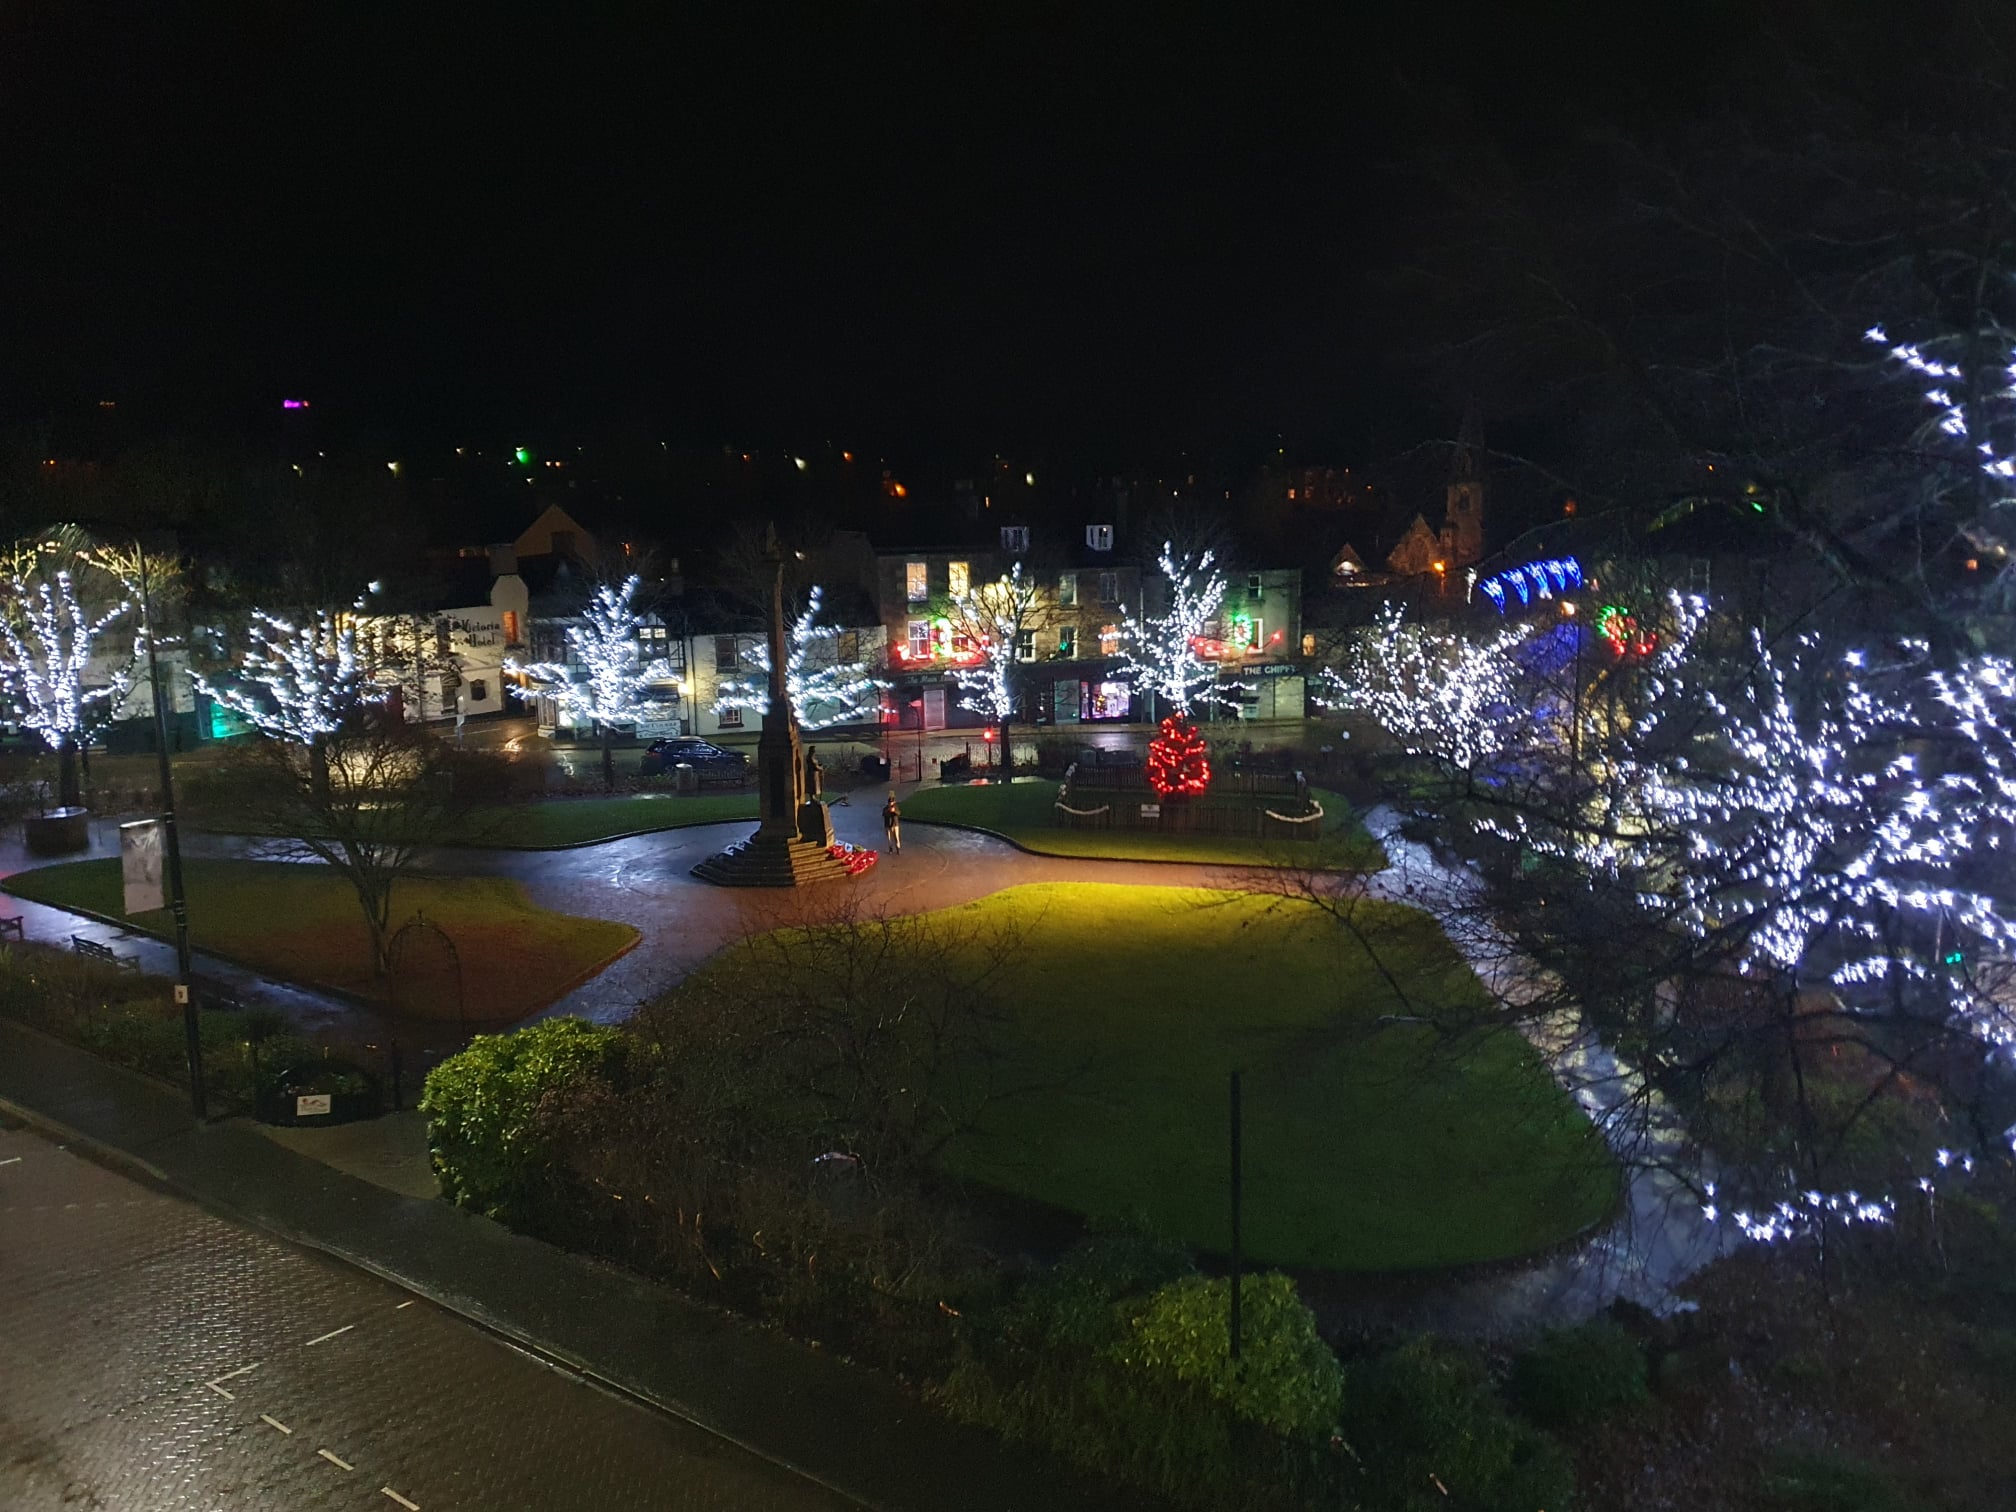 Wellmeadow at Christmas time